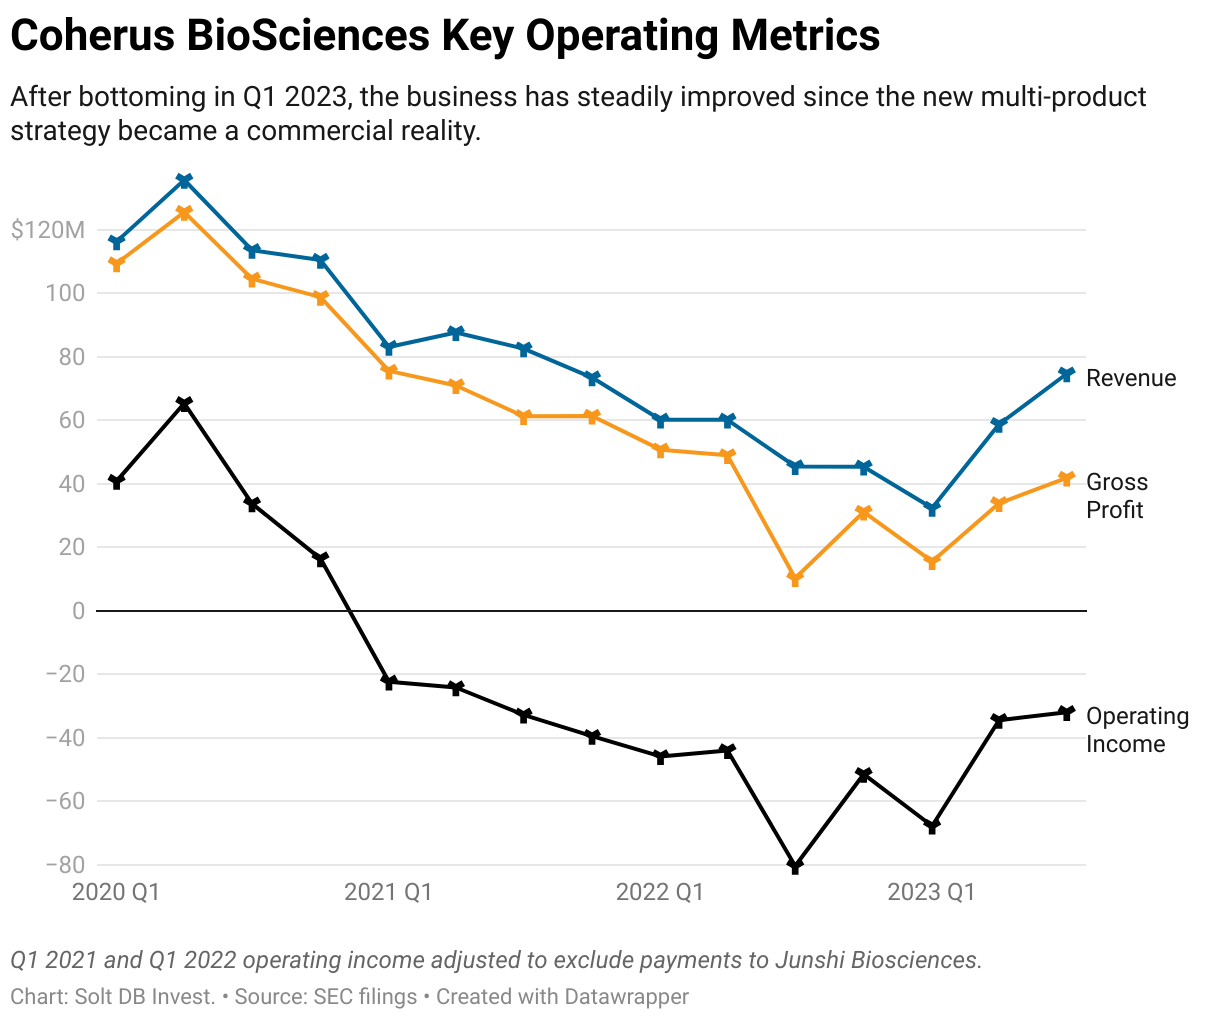 A line graph showing quarterly revenue, gross profit, ad operating income at Coherus BioSciences from Q1 2020 to Q3 2023.